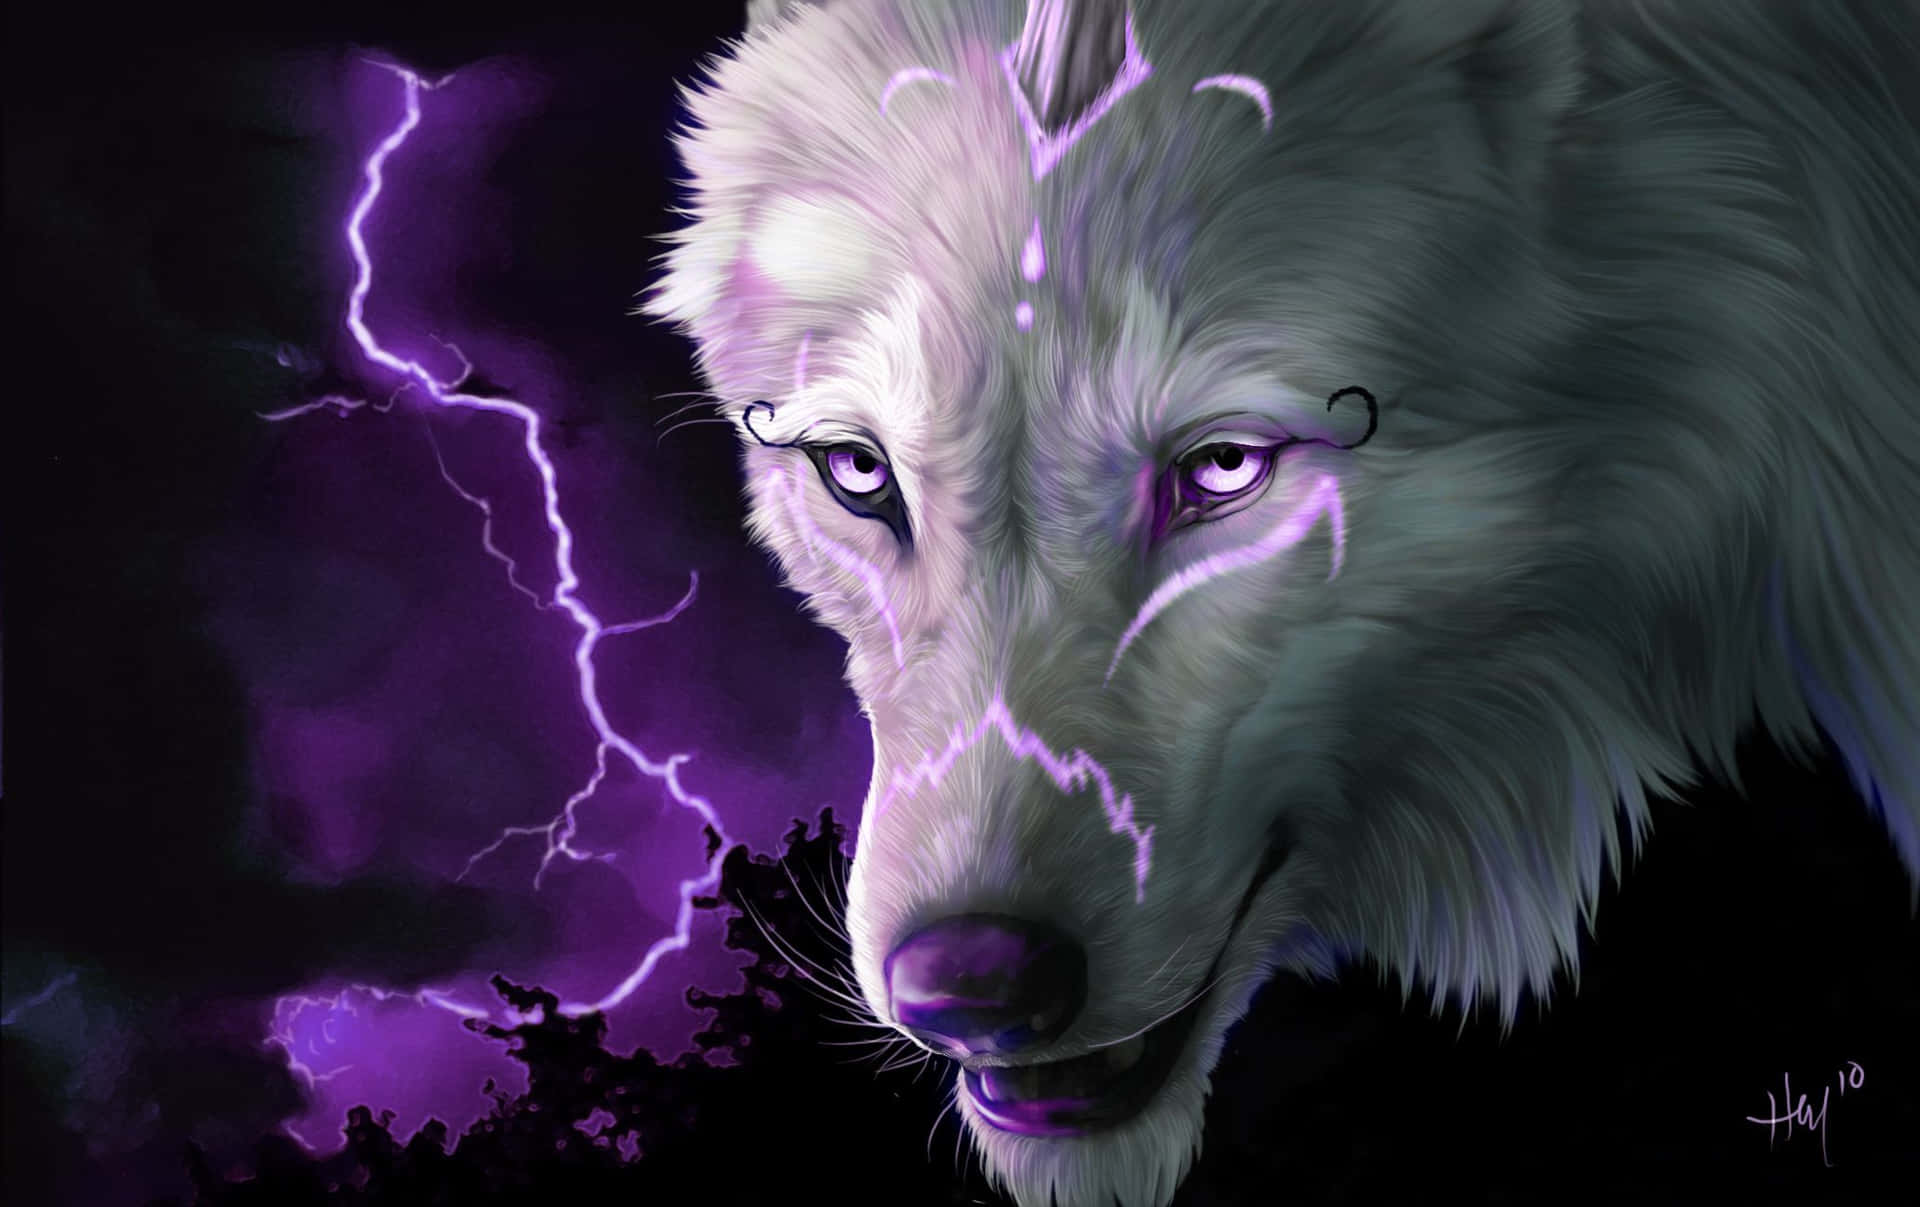 Dive Into The Wild And Explore The Mysteriousness Behind The Super Cool Wolf! Wallpaper